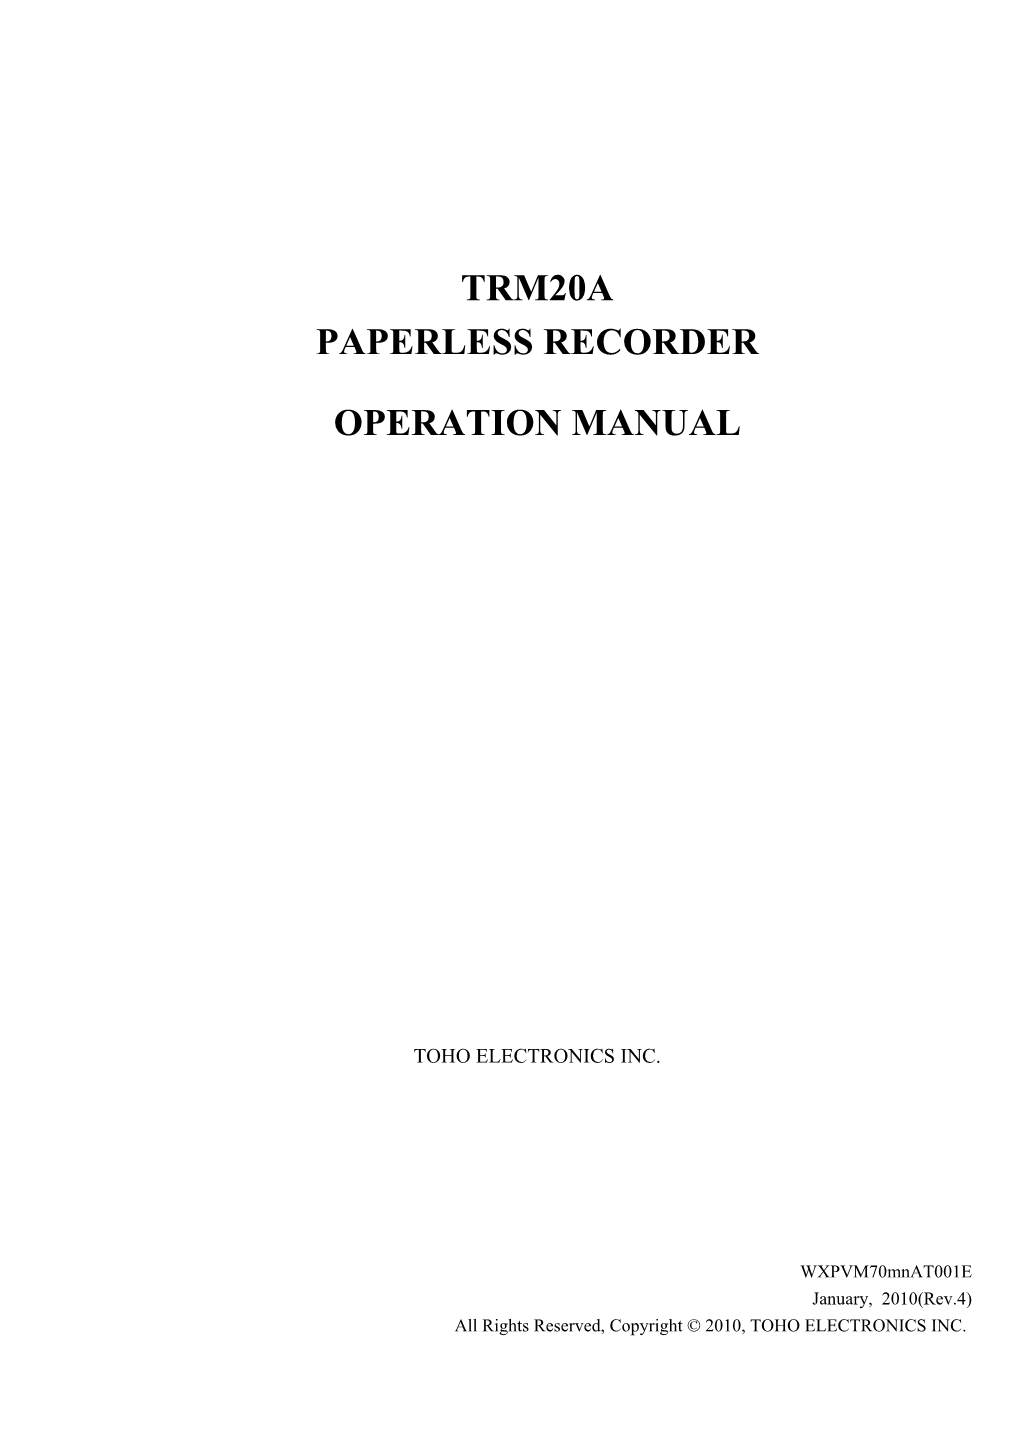 Trm20a Paperless Recorder Operation Manual